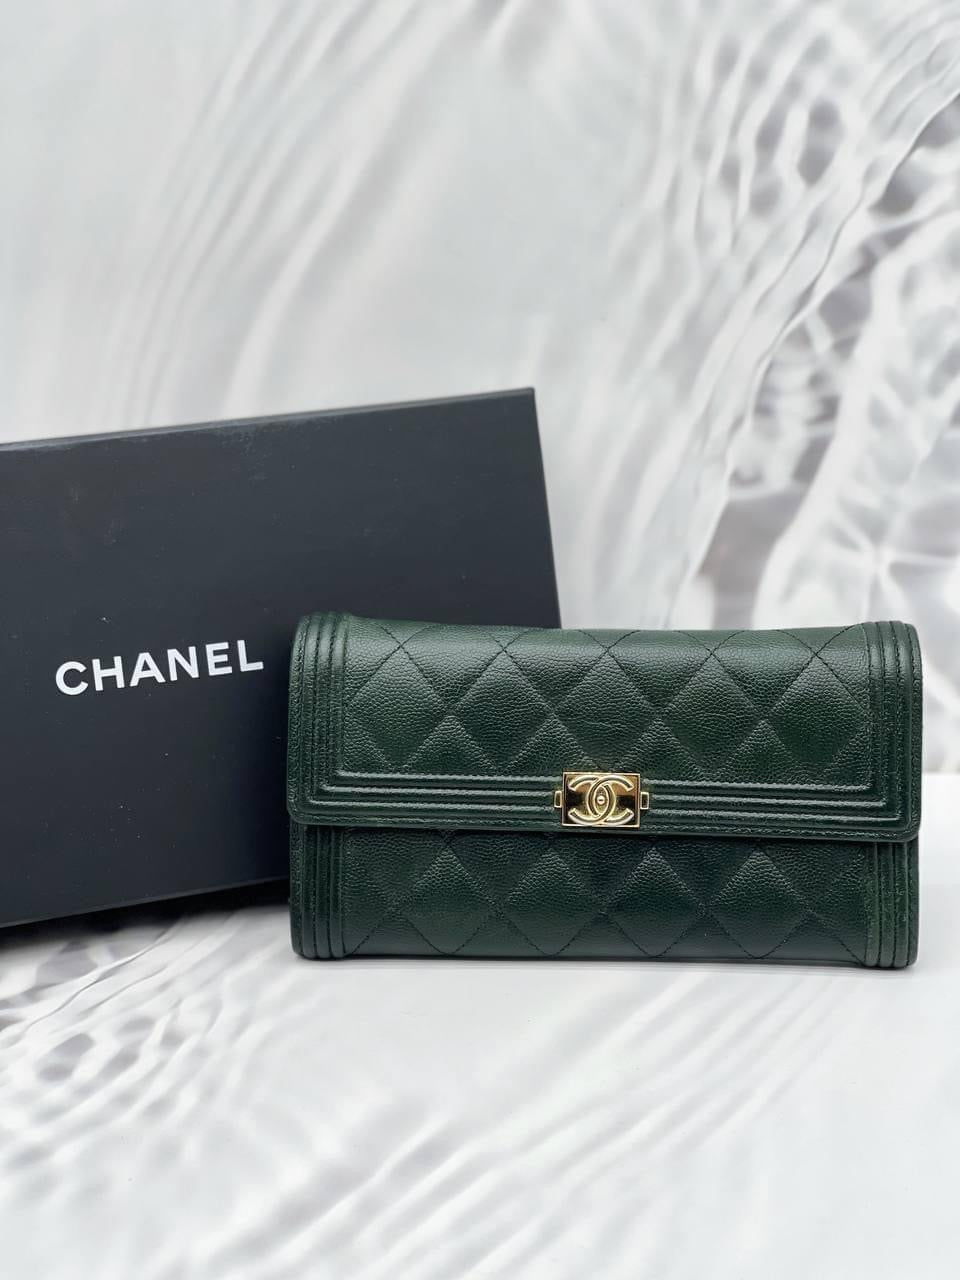 Chanel Boy Chanel Compact Chain Wallet Green AP2206 Caviar Leather